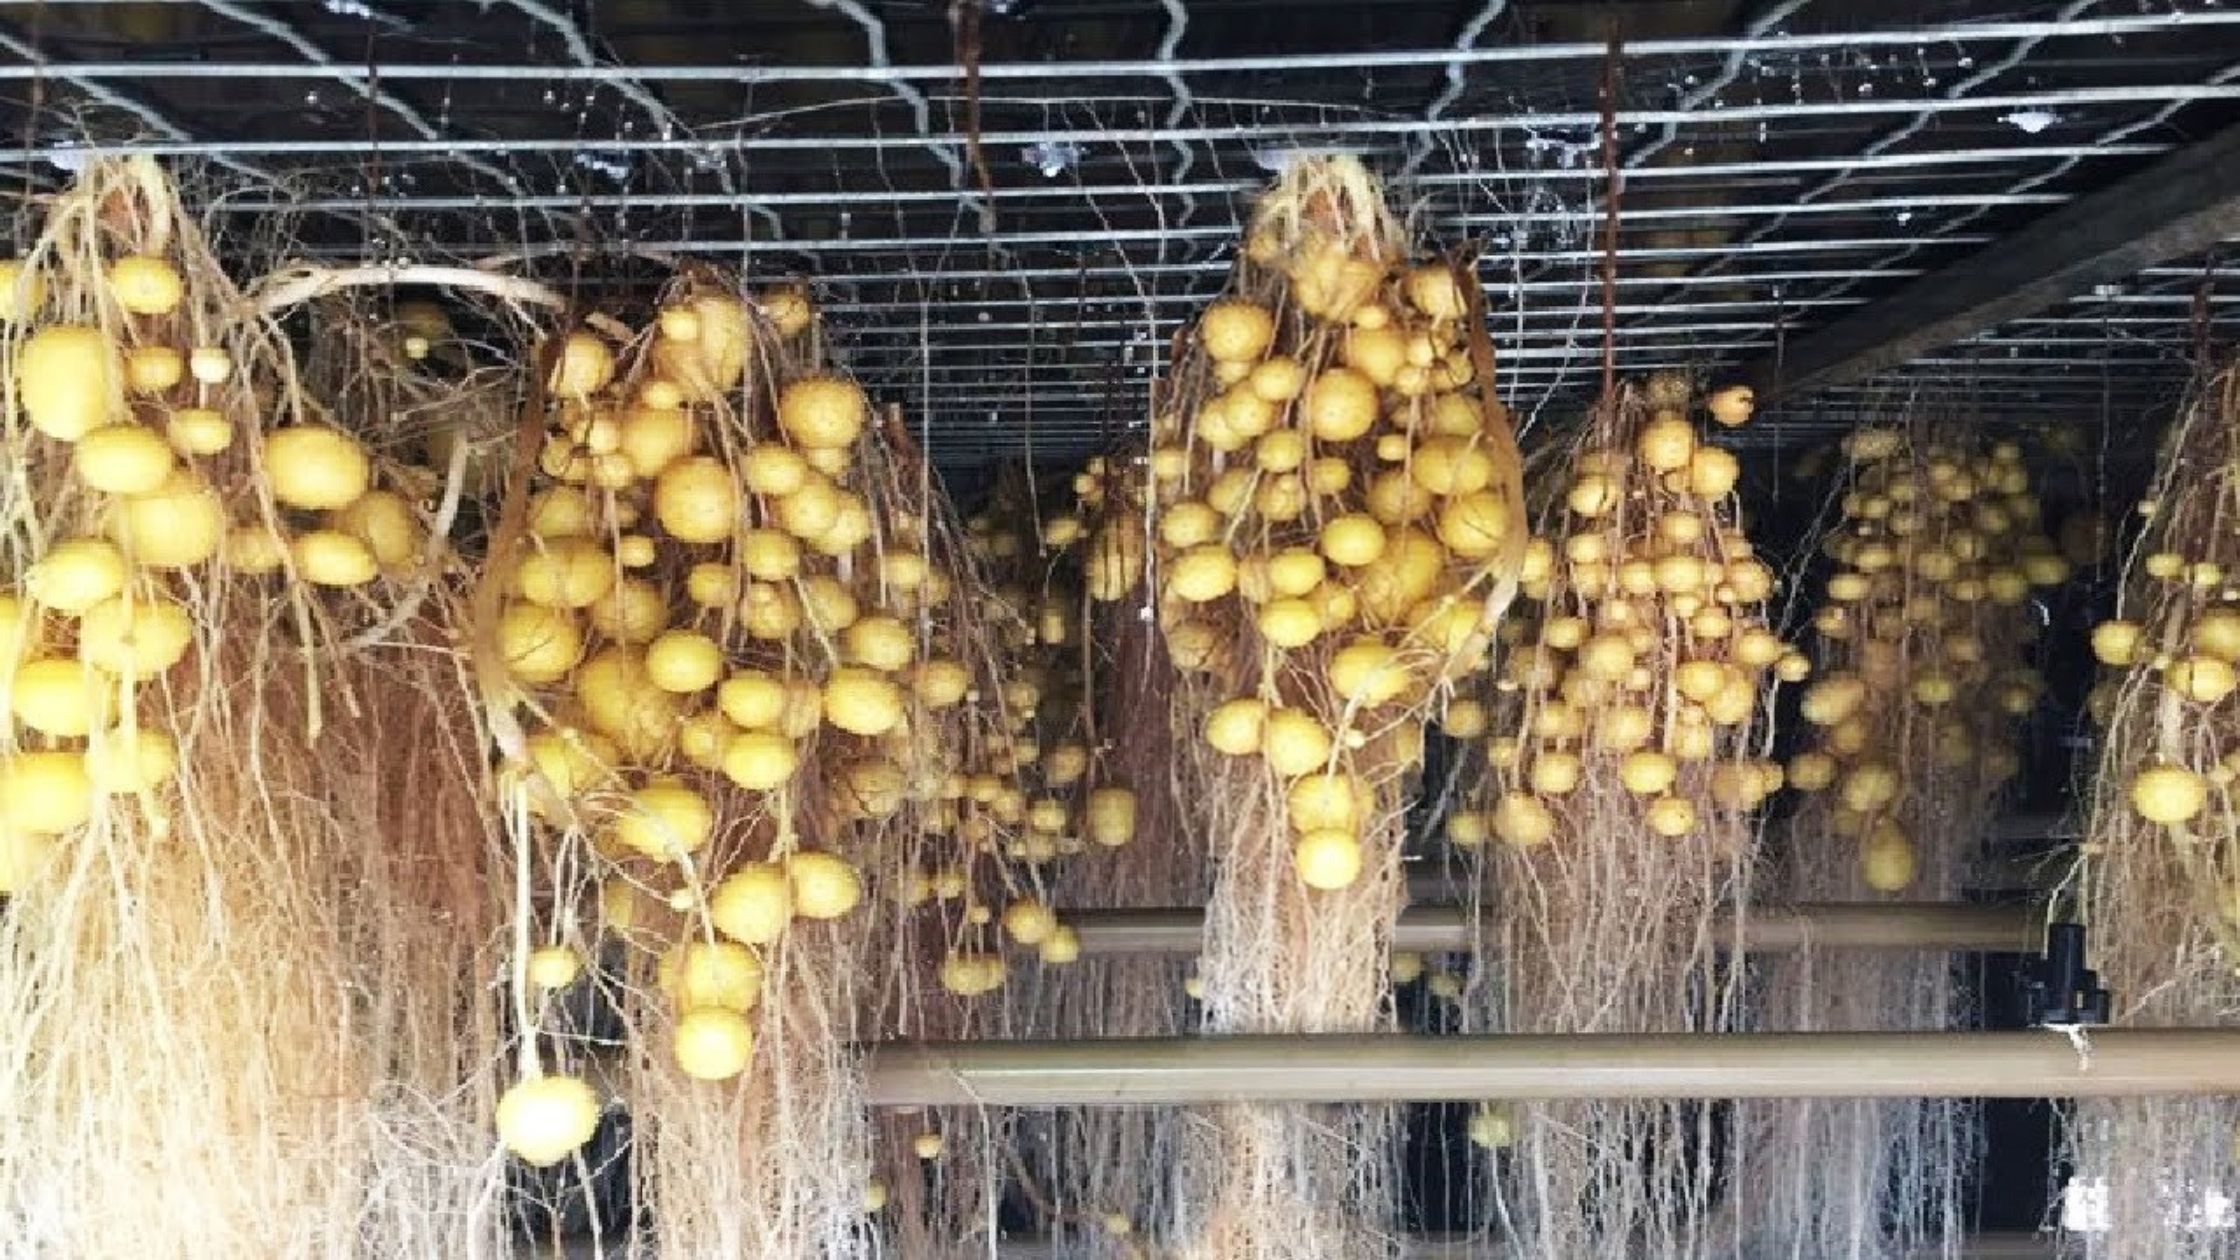 Farmers of Bihar will now grow potatoes in the air